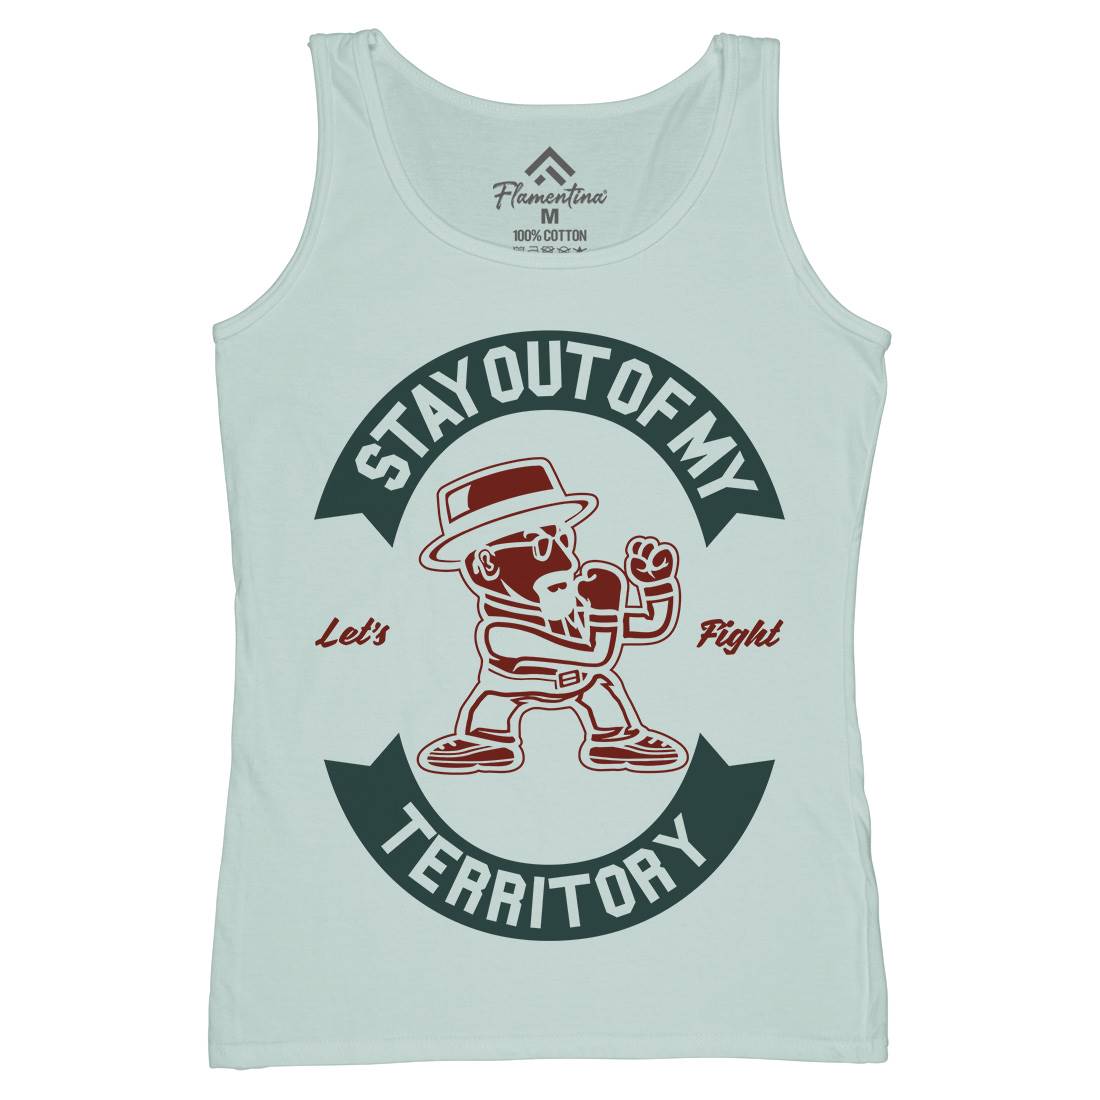 Stay Out Womens Organic Tank Top Vest Retro A284